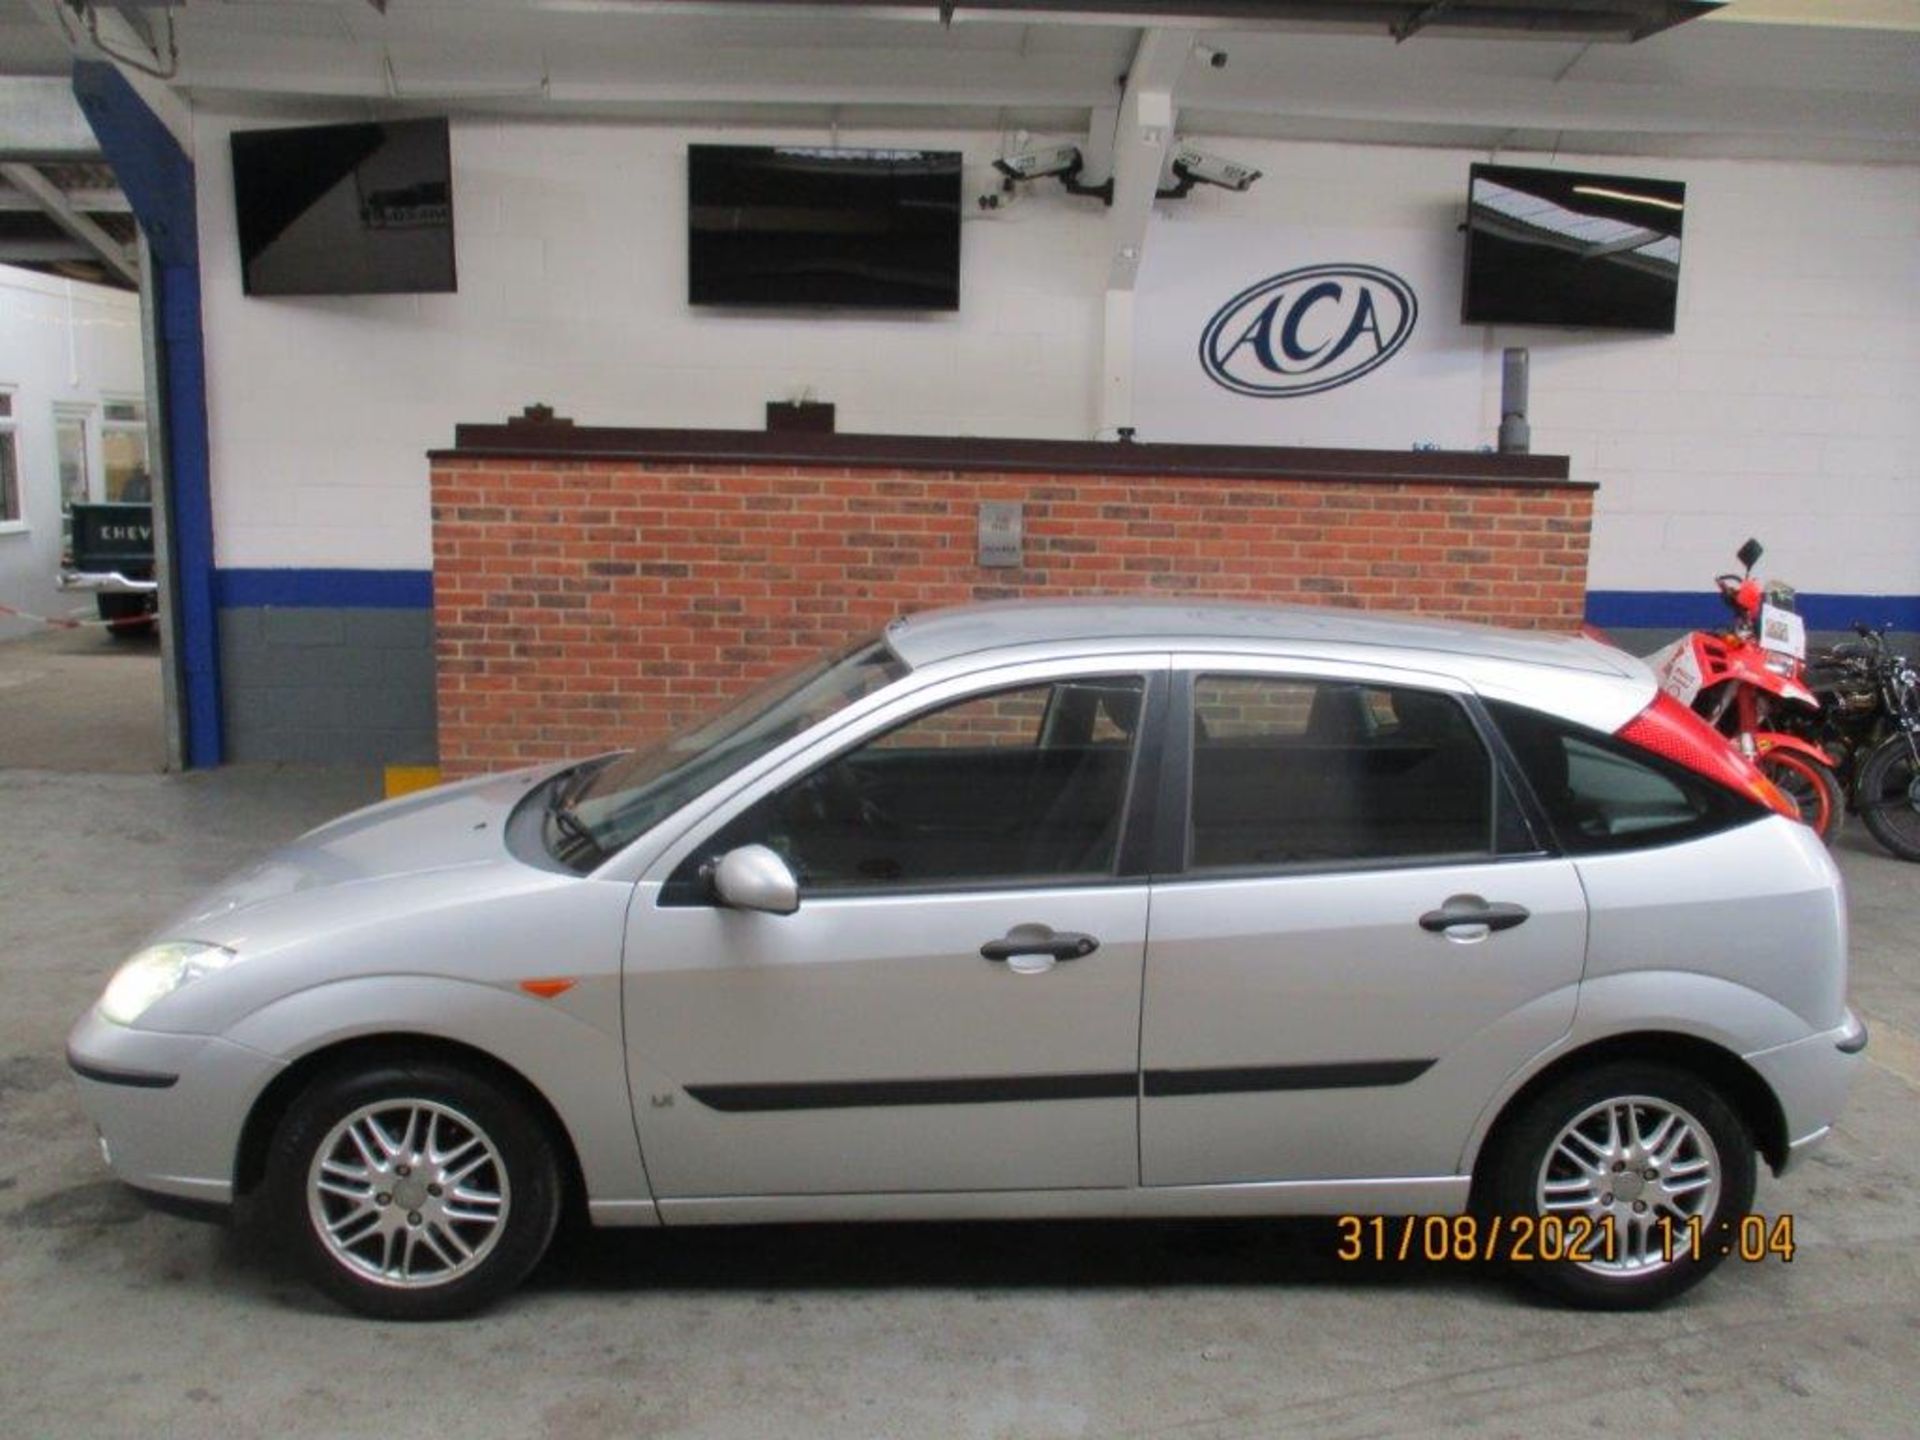 04 04 Ford Focus LX - Image 2 of 16